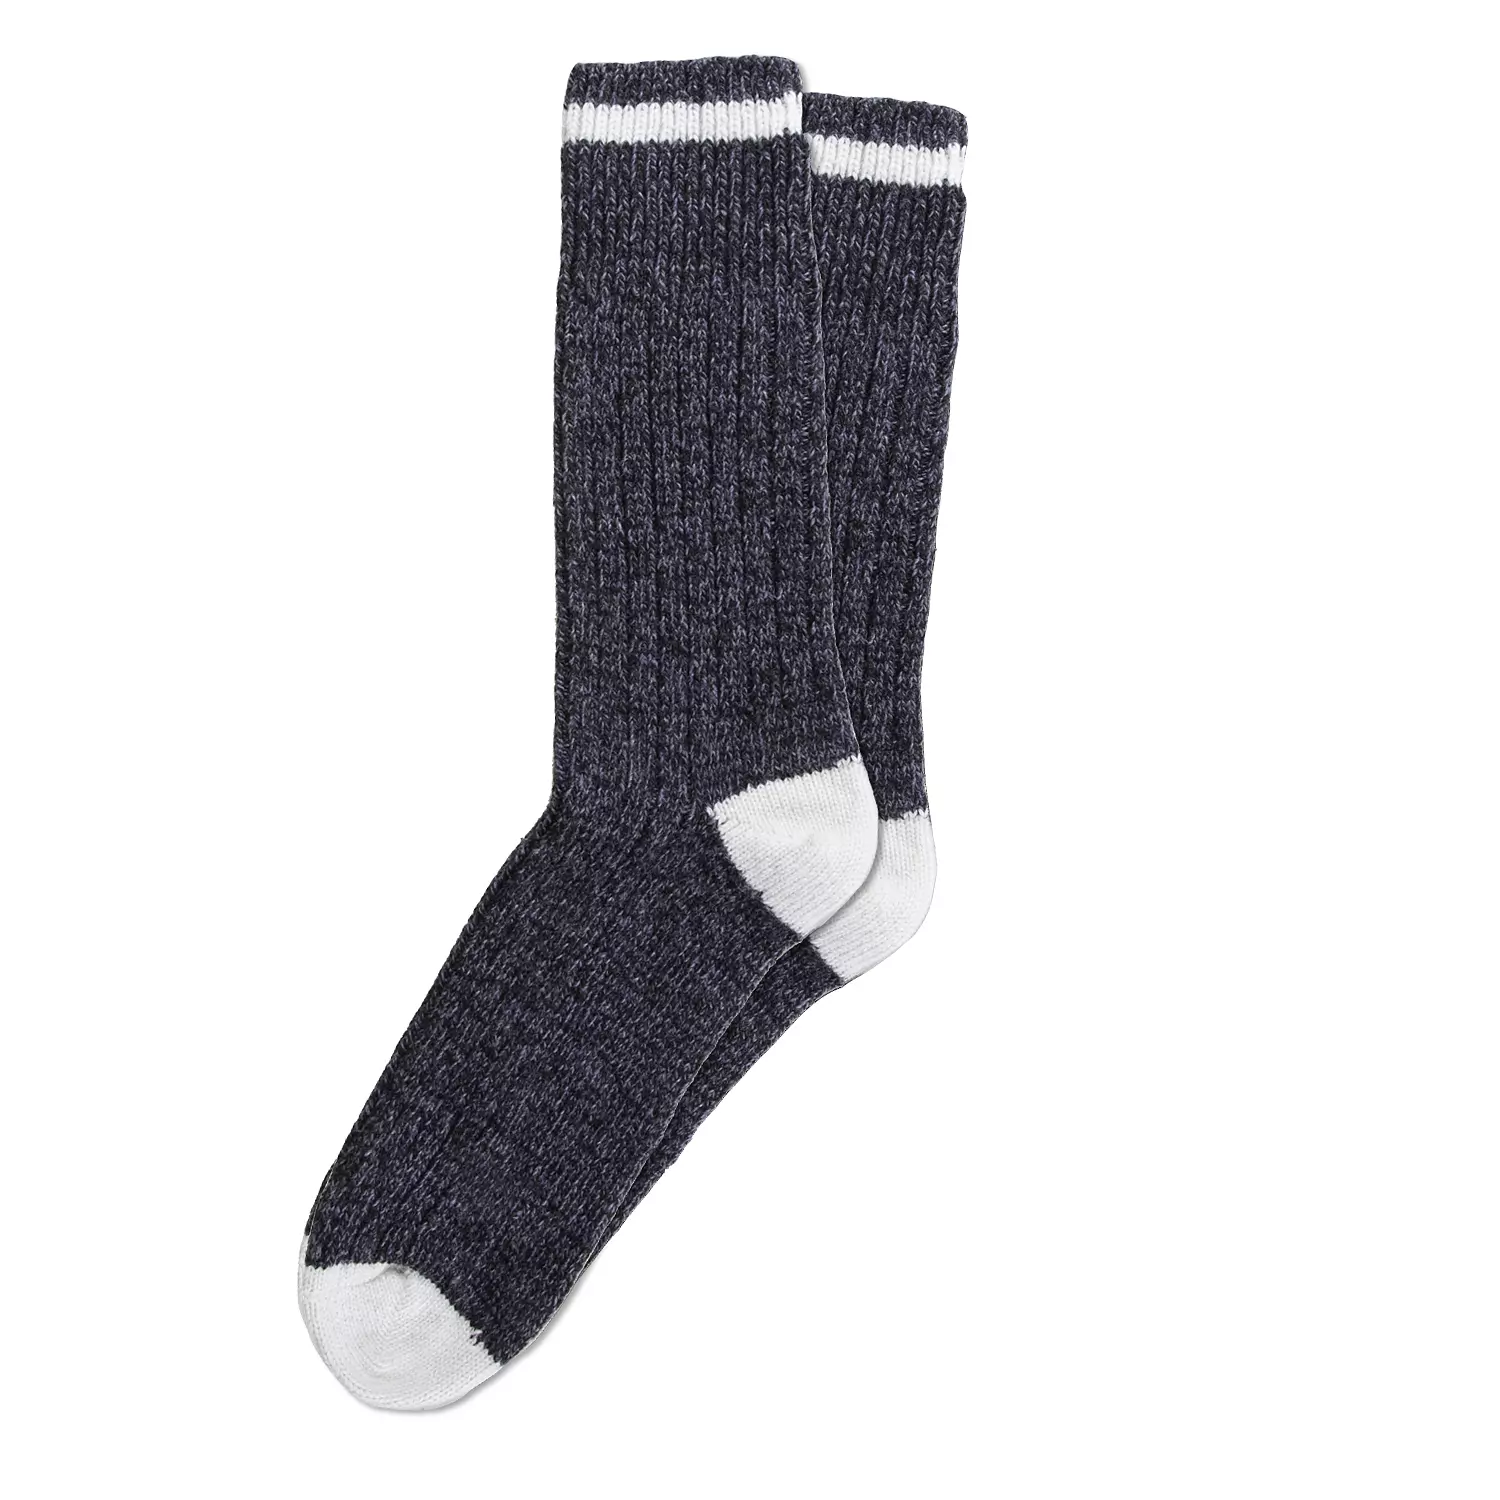 Thermal socks from DURAY